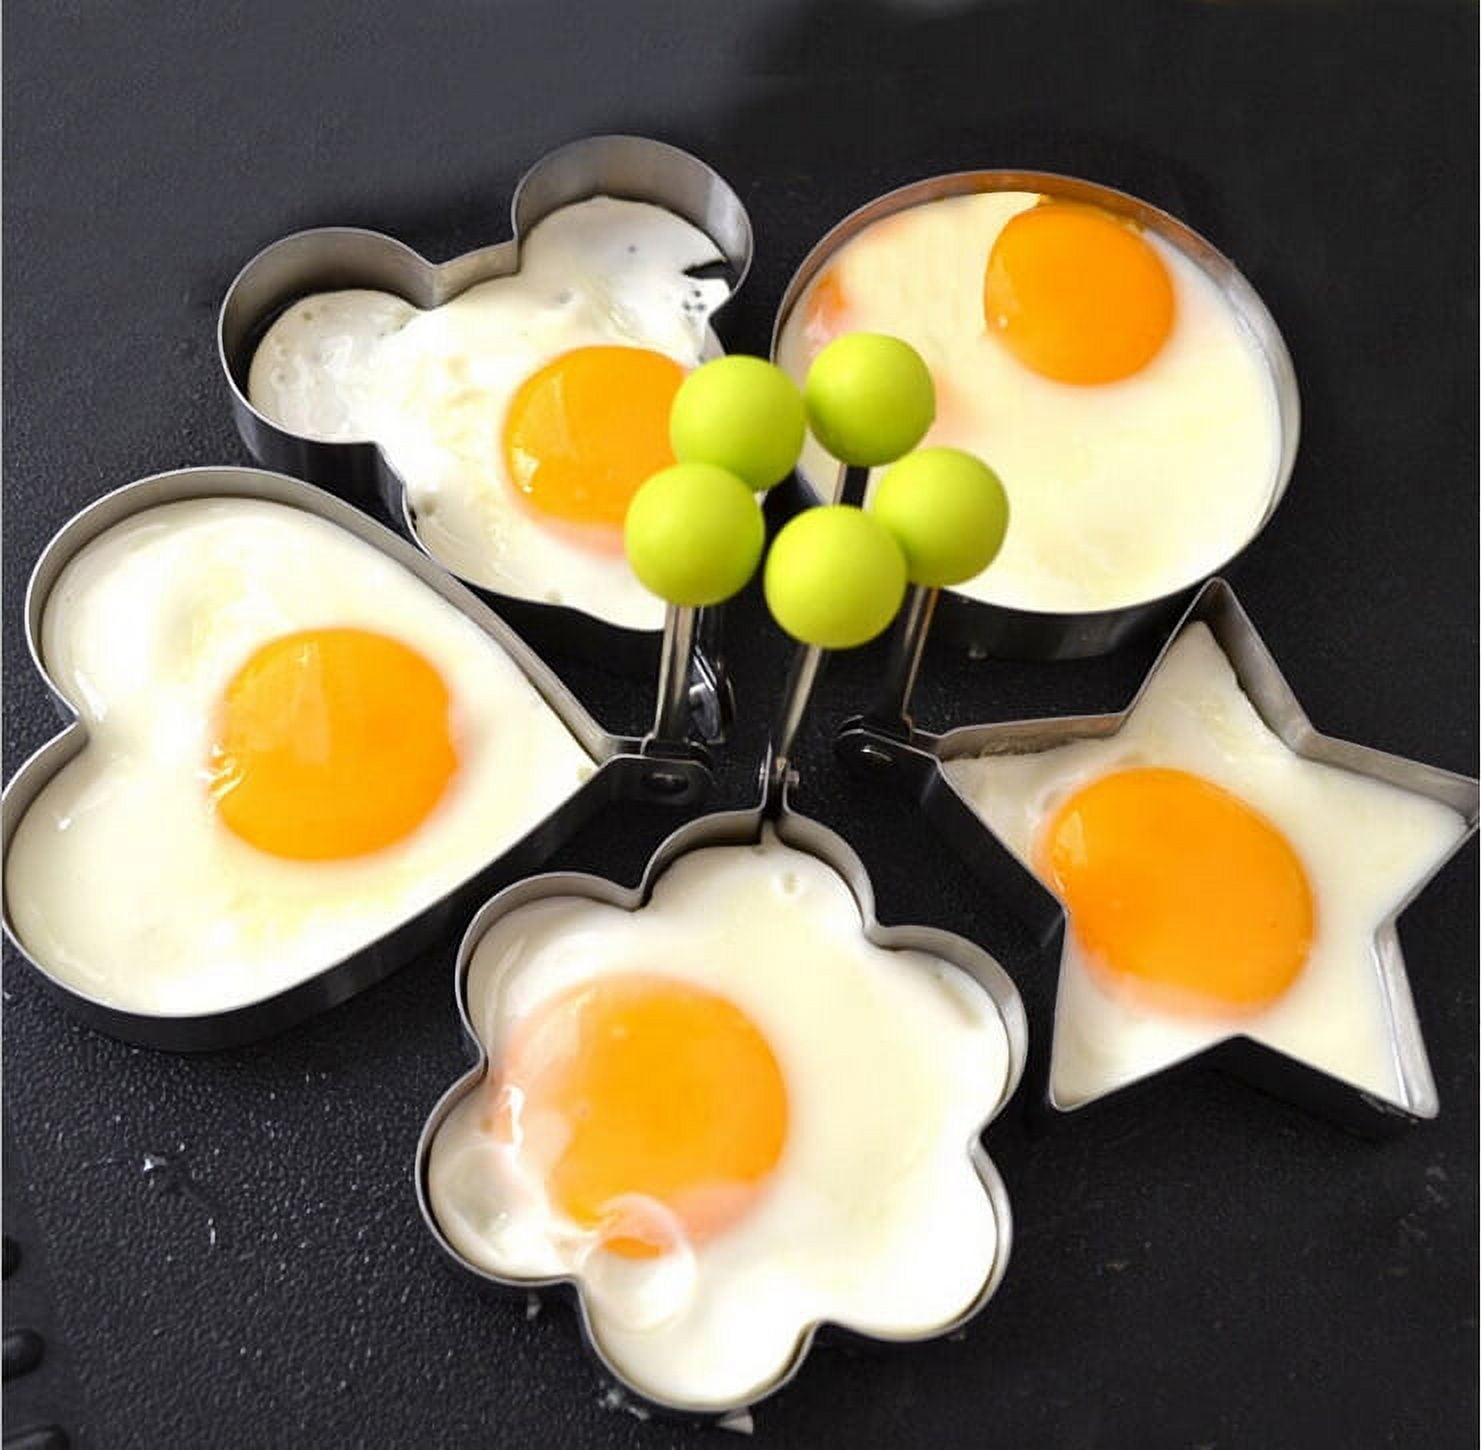 2Pcs Funny Egg Fryer with Retractable Handle Egg Cooking Ring DIY Non-Stick Egg  Fried Mould Creative Egg Pancake Cooking Tool - AliExpress